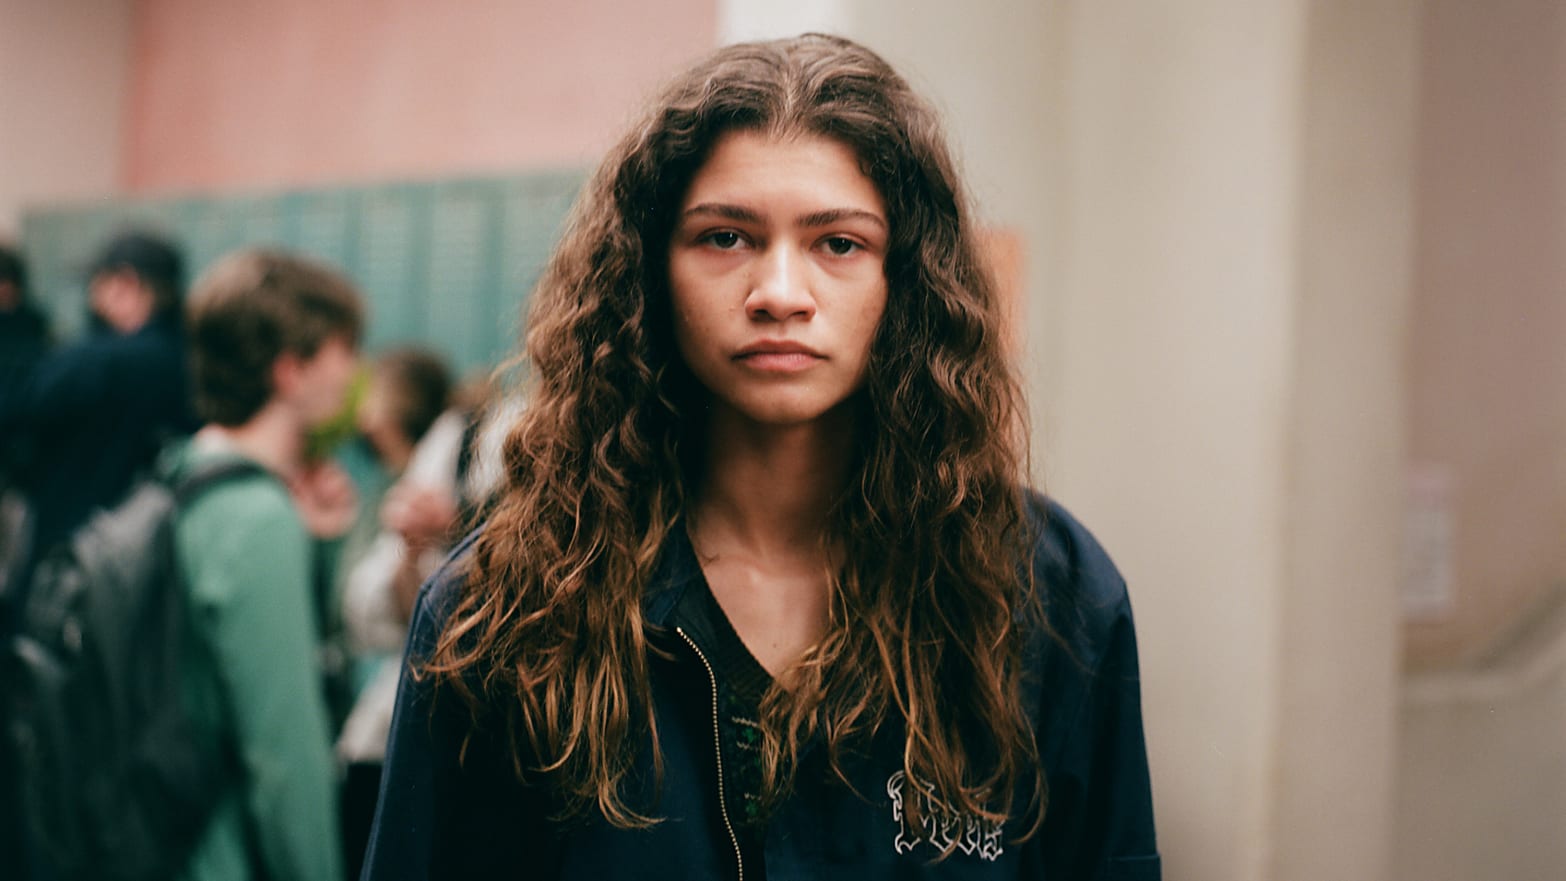 Euphoria Outfits & Fashion Guide: Rue, Jules, Maddy, Kat, Cassie, Lexi